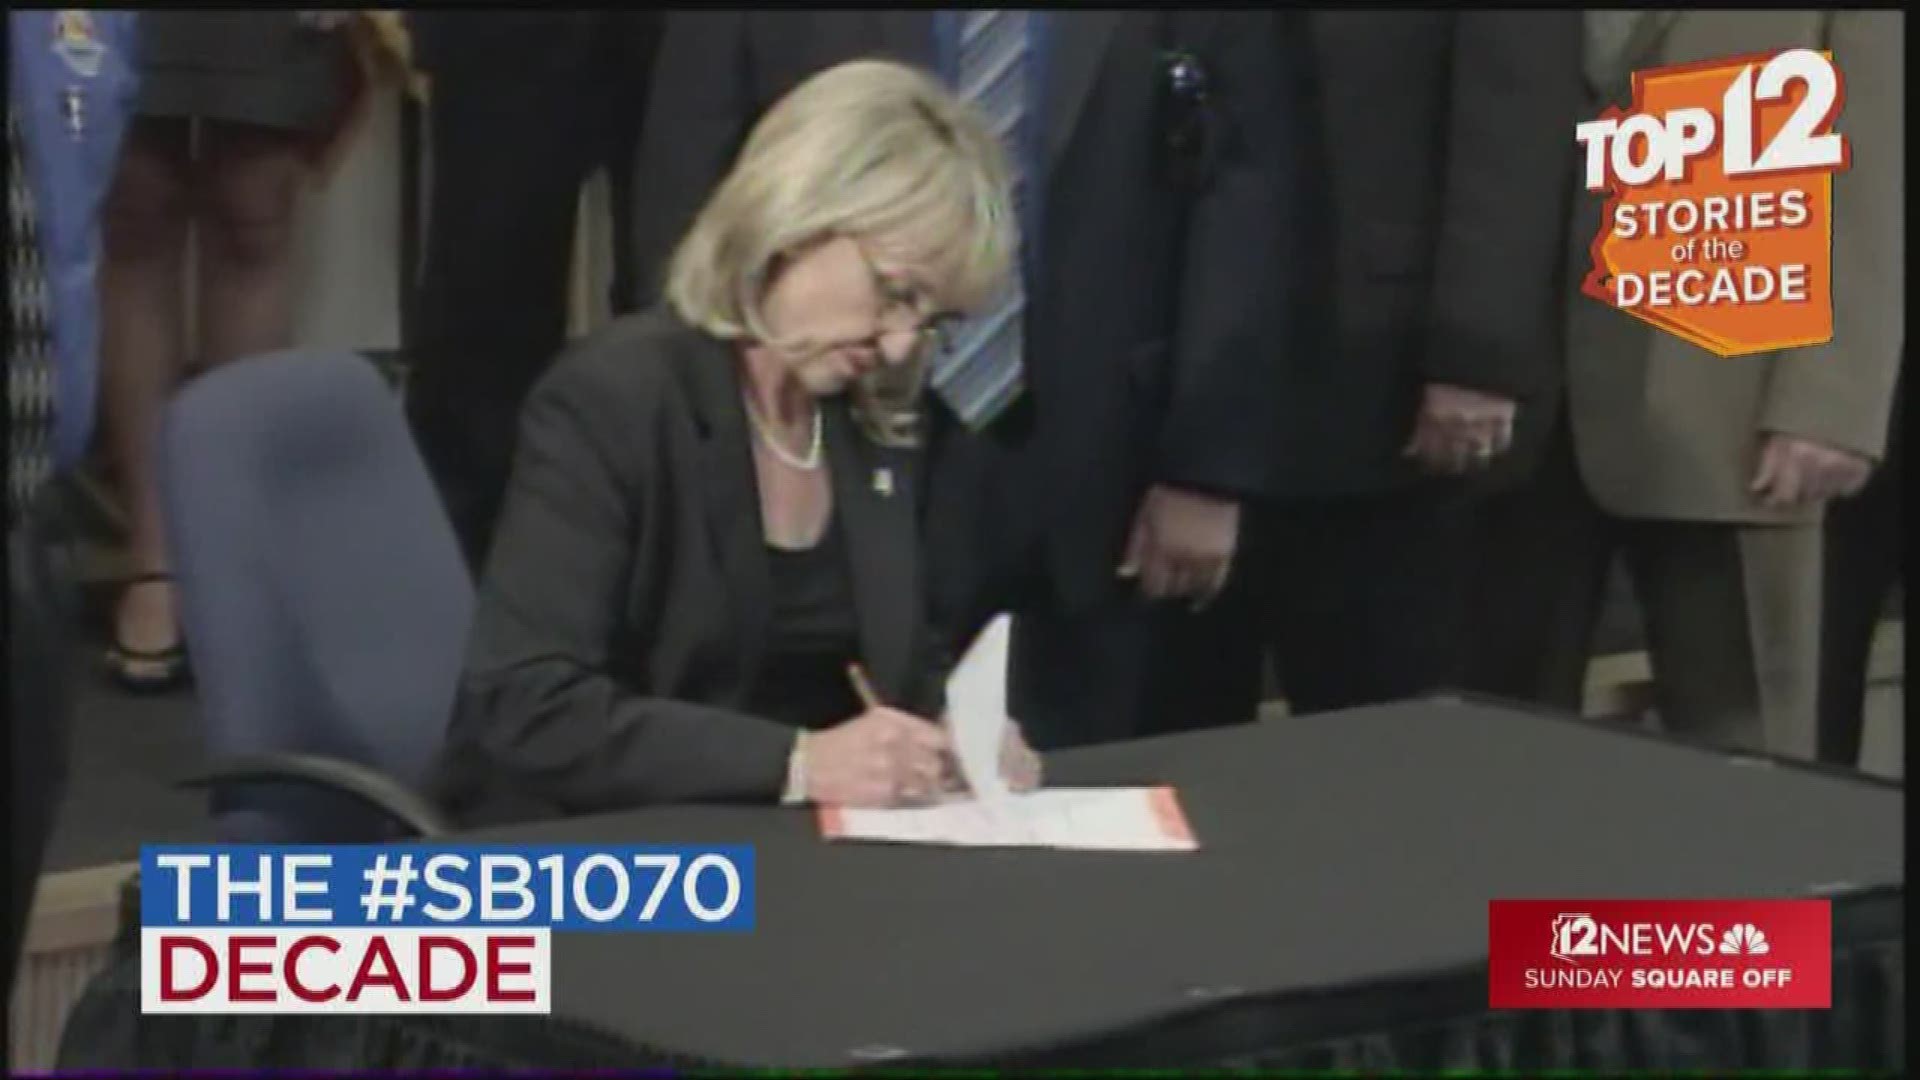 In 2010, Gov. Brewer signed SB 1070, at the time the toughest immigration law in the country. The law has spawned a new wave of Latino activists and office holders.